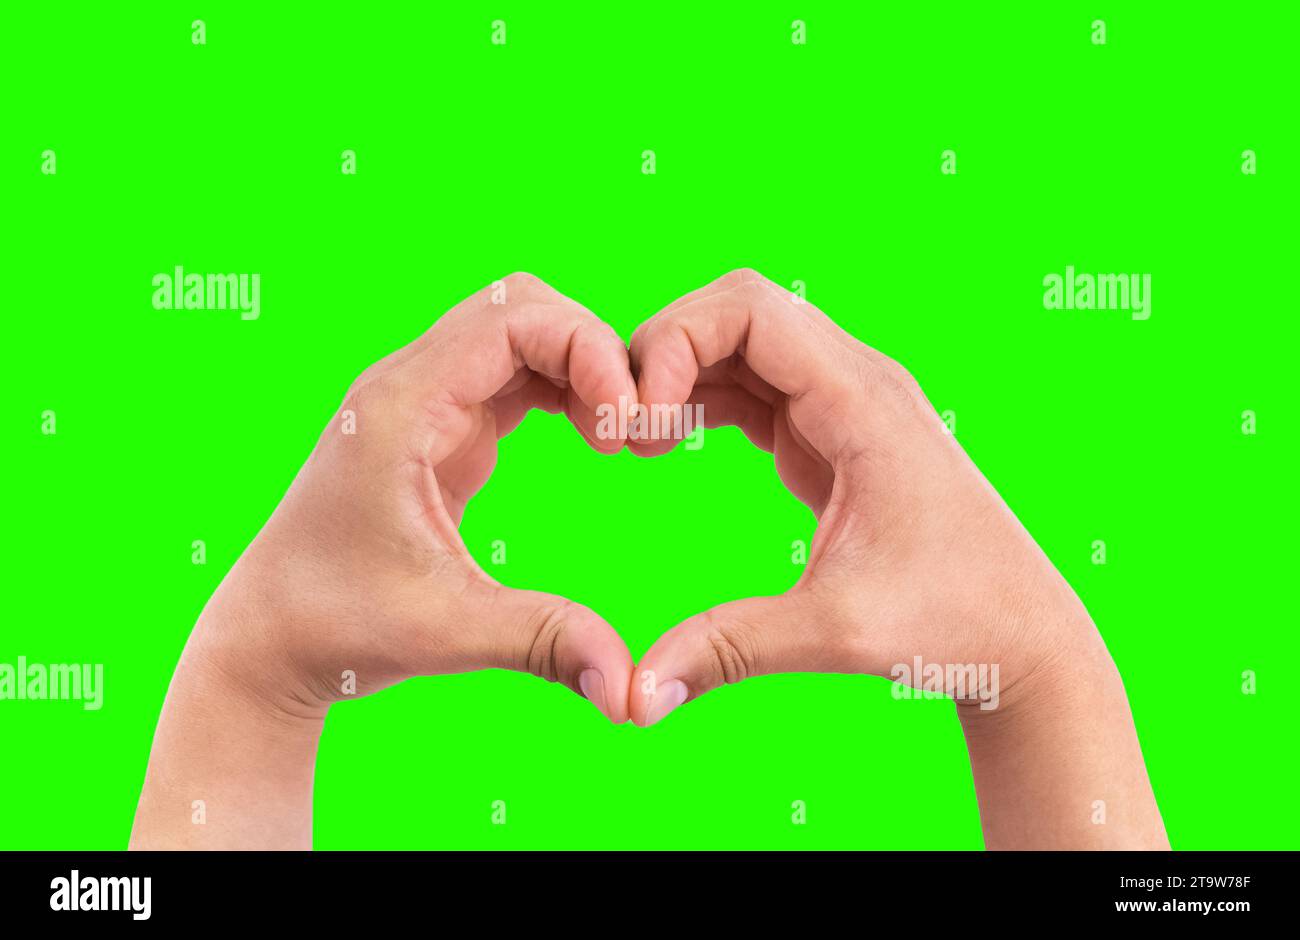 man hands in the form of heart against the chroma key green screen background, hands in shape of love heart valentine day concept Stock Photo